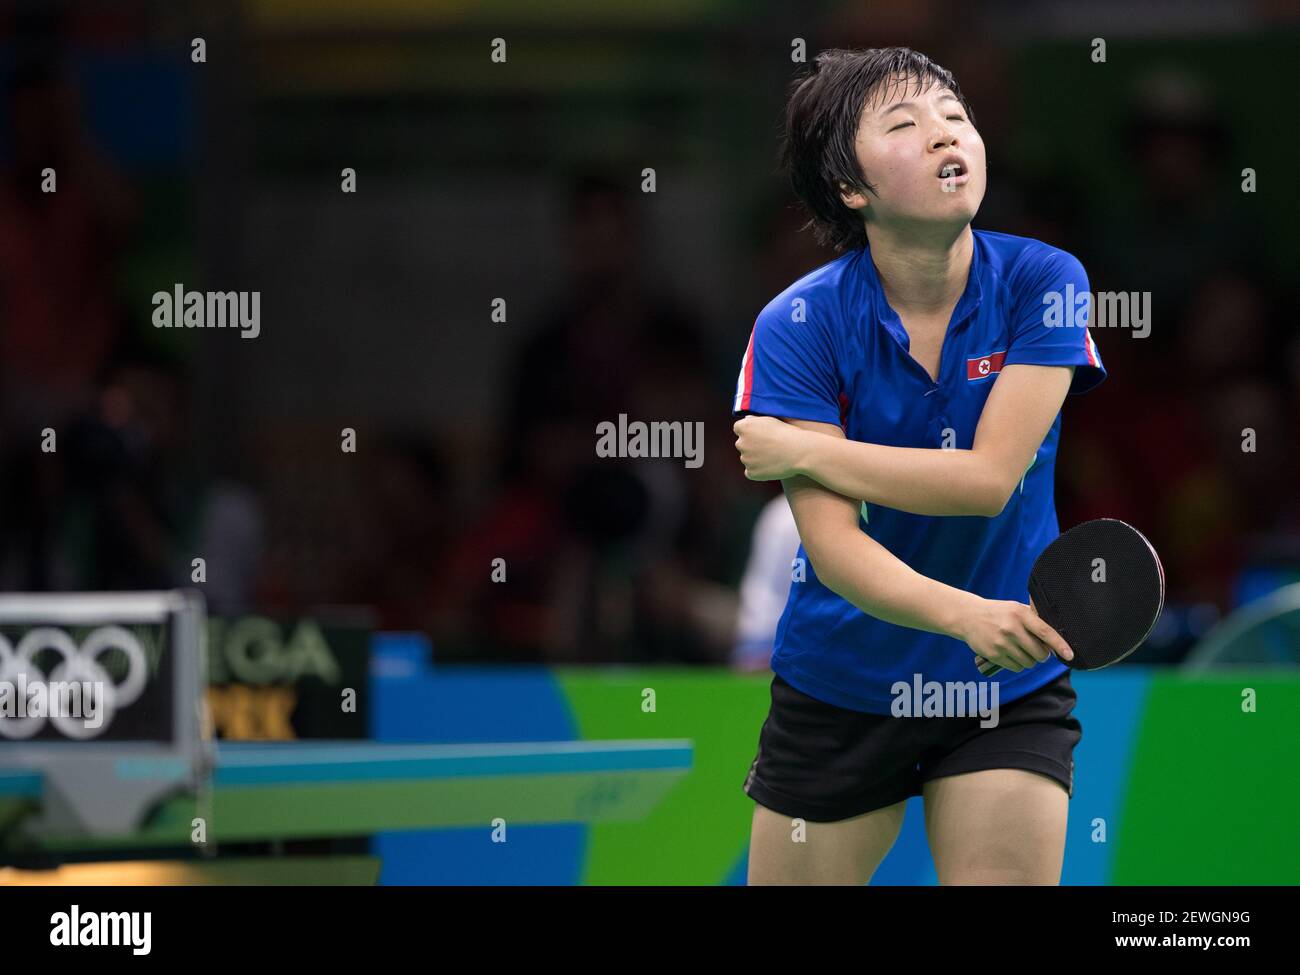 TABLE TENNIS - KIM Song I (PRK) during the semi final of table tennis Rio  2016 Olympics held in Pavilion 3 of Riocentro. NOT AVAILABLE FOR LICENSING  IN CHINA (Photo: Marcelo Machado